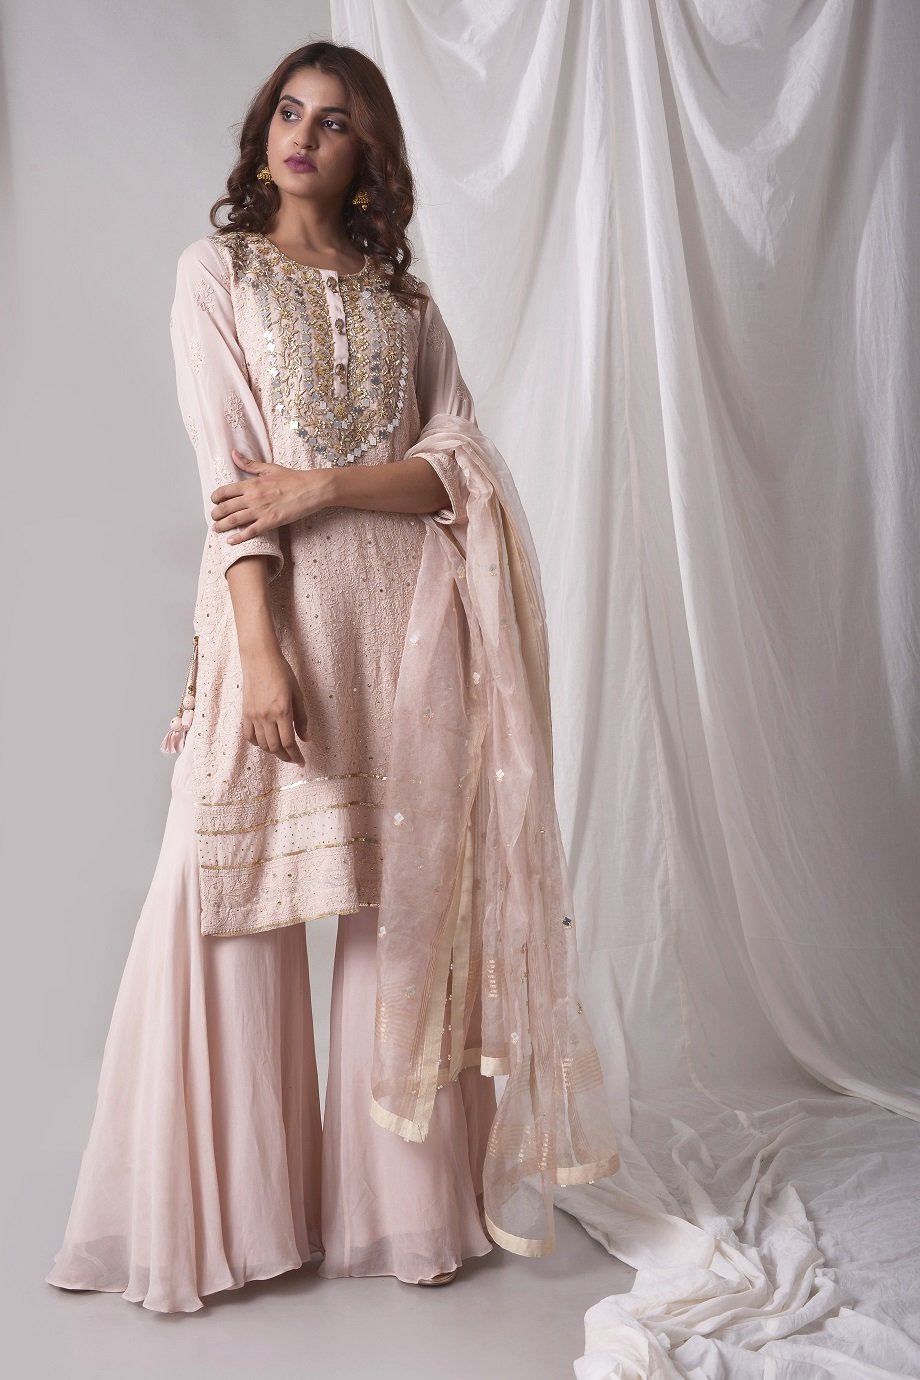 Buy powder pink georgette suit online in USA. Be the talk of parties and weddings with exquisite designer gowns, Indian suits, Anarkali dresses, Indo-western dresses from Pure Elegance Indian clothing store in USA .Shop online now.-full view